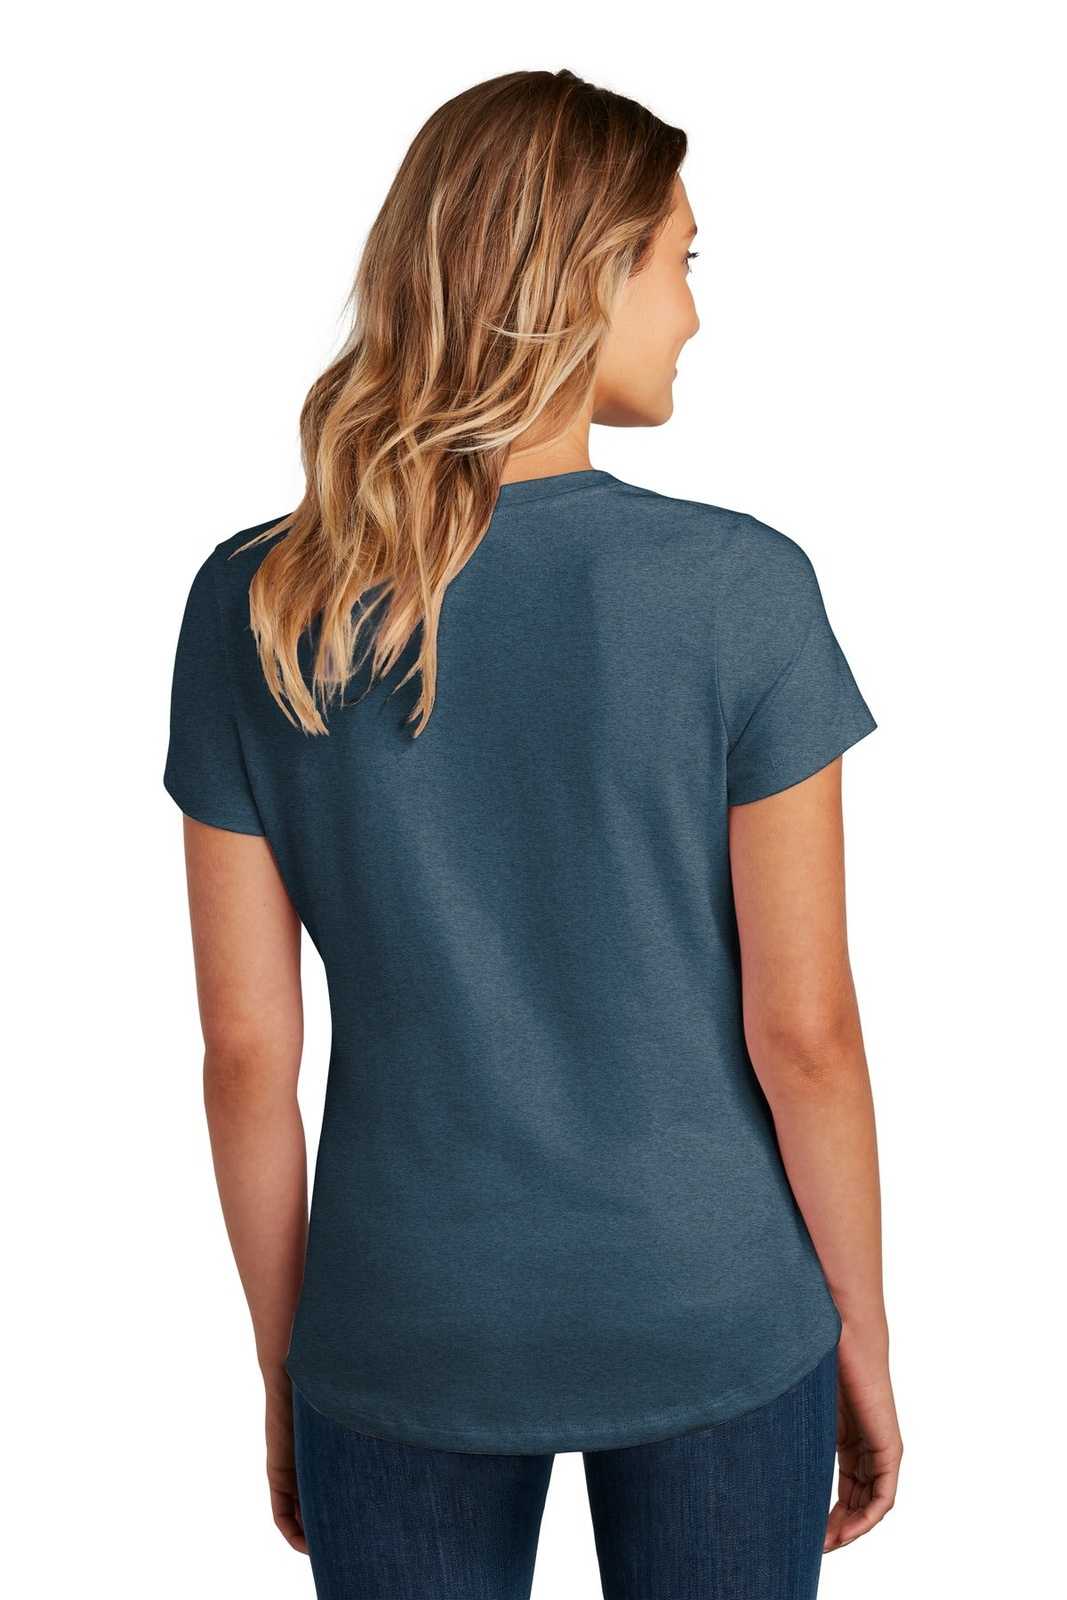 District DT7501 Womens Flex Scoop Neck Tee - Heathered Neptune Blue - HIT a Double - 2